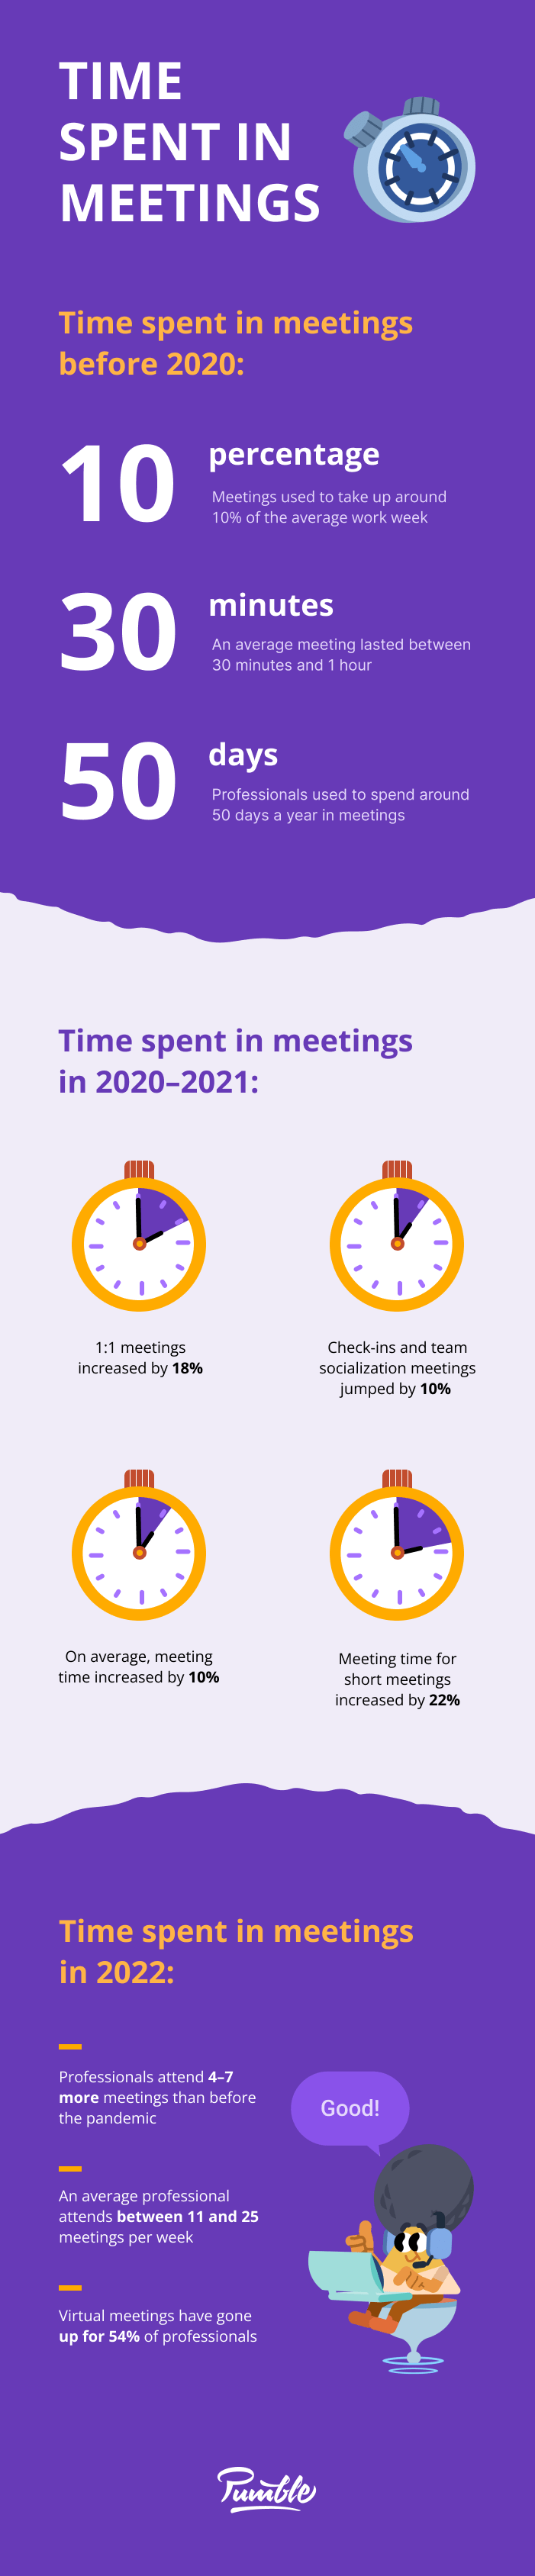 Statistics on time spent in meetings